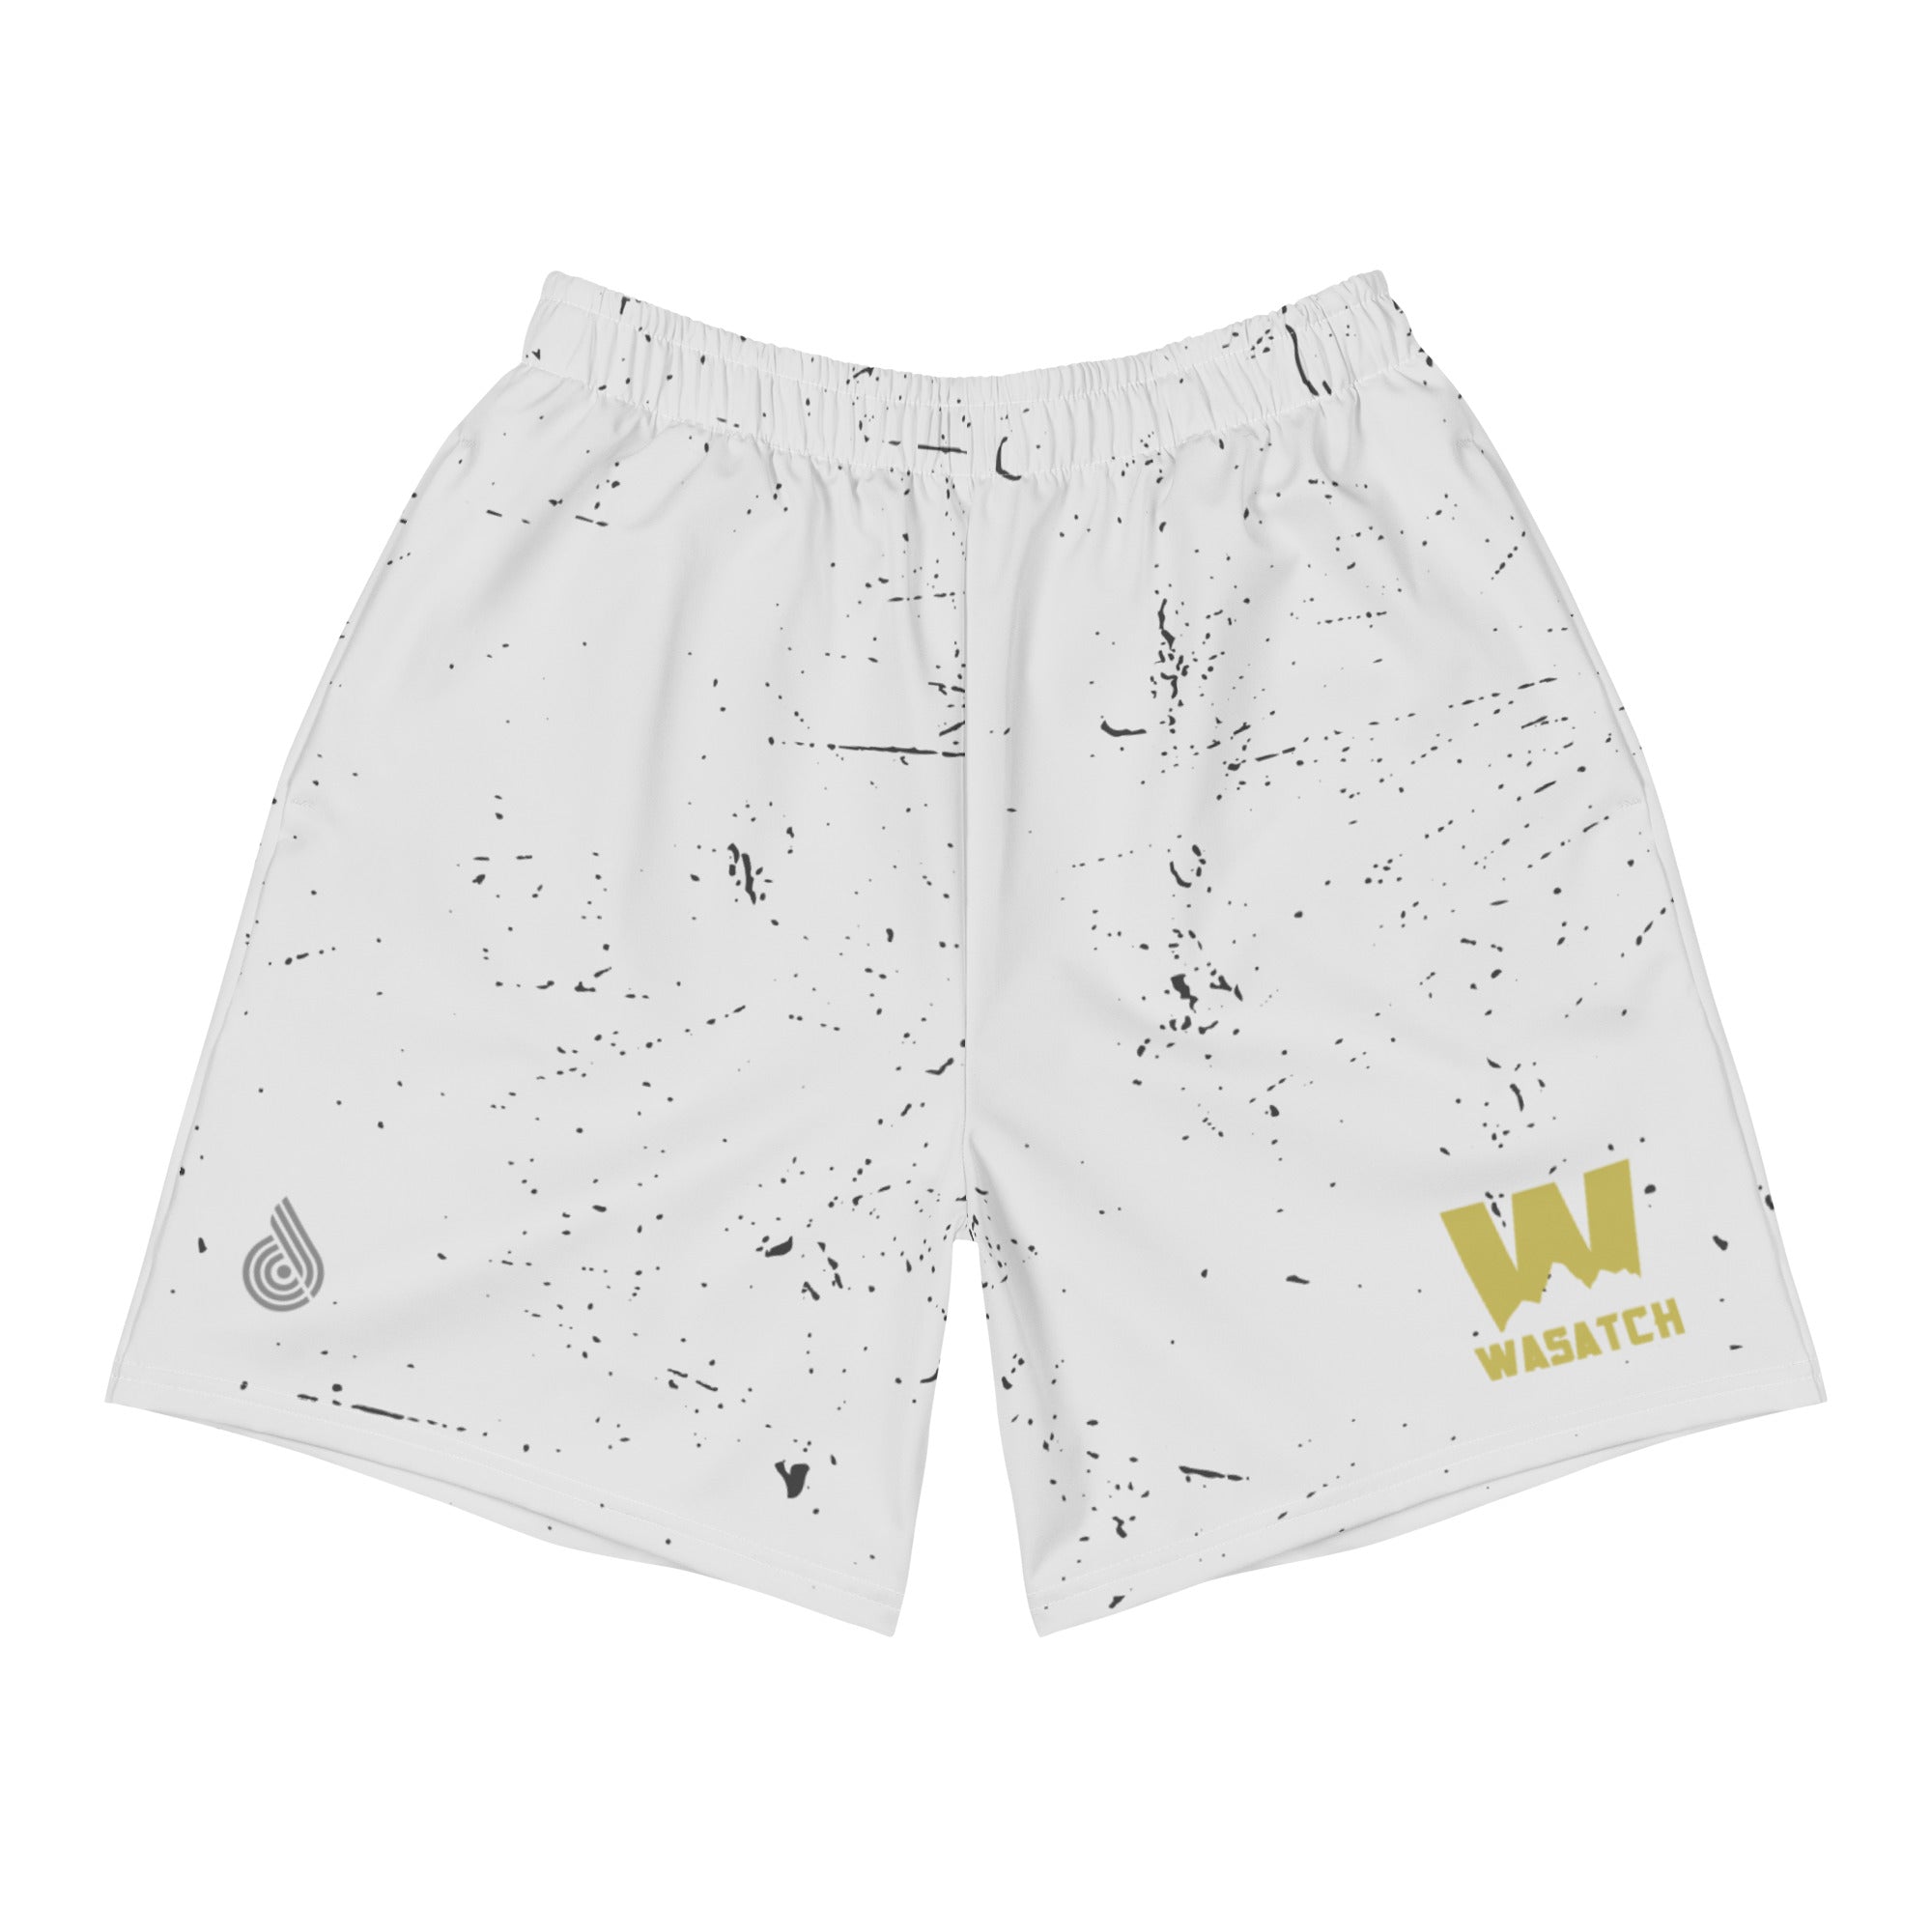 Wasatch Men's Athletic Shorts